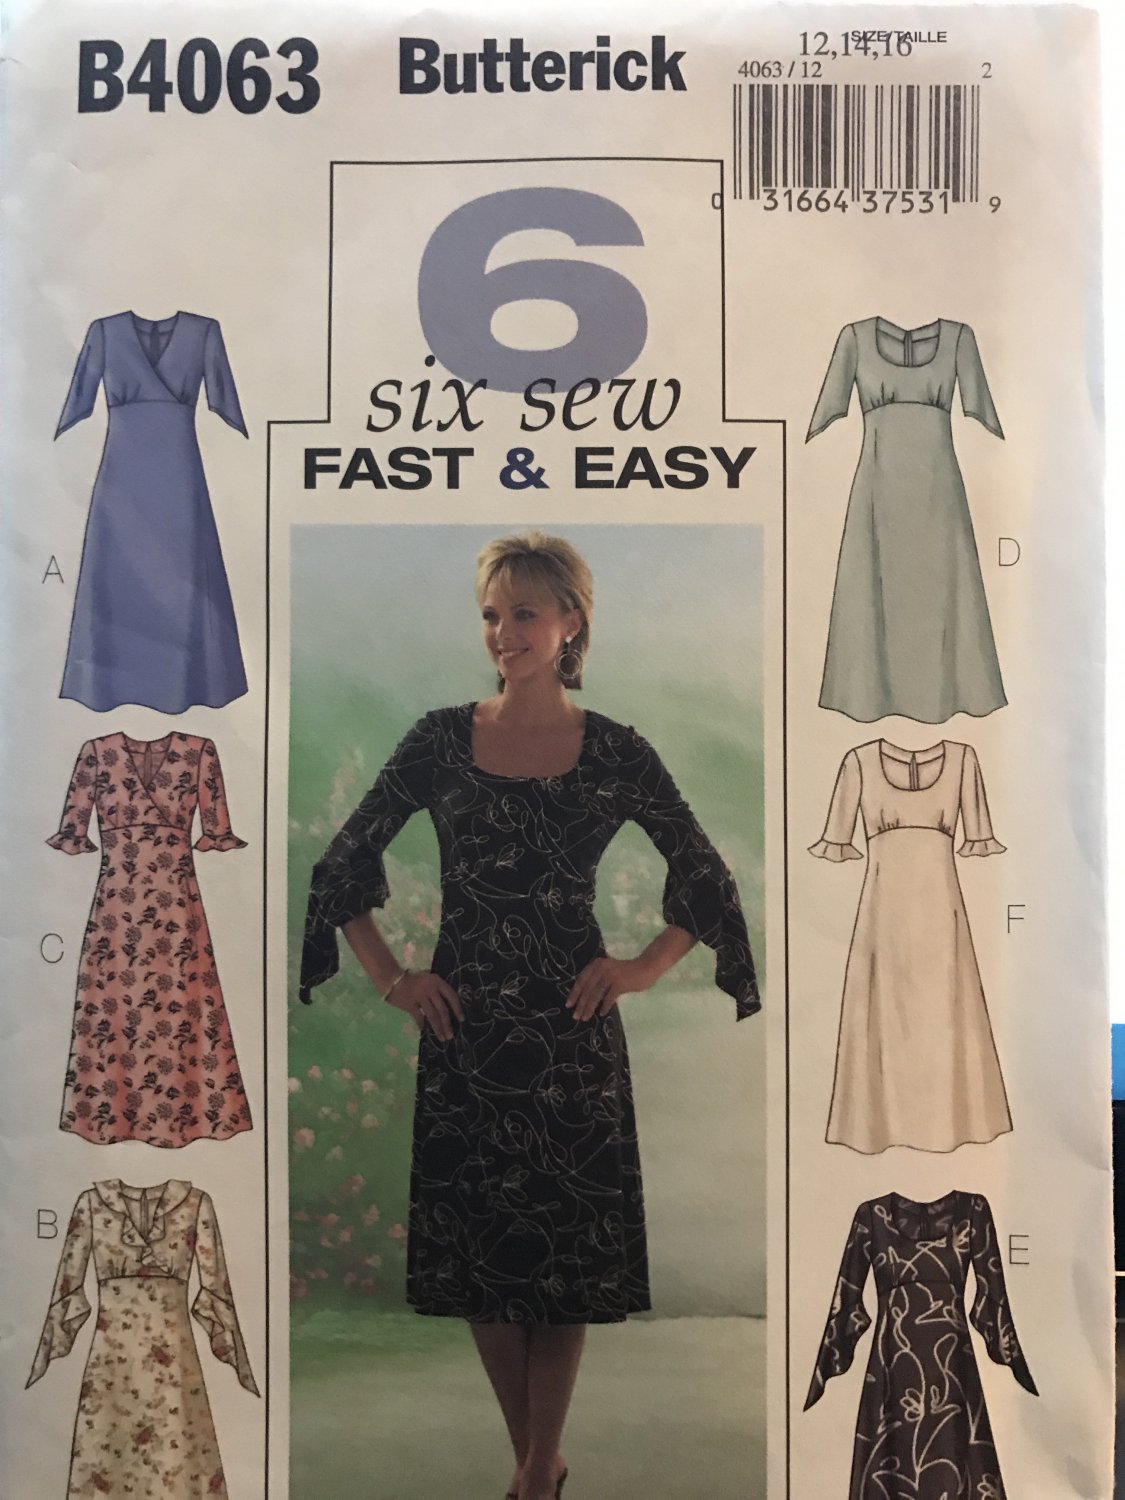 Butterick 4063 Sewing Pattern Six fast & easy Dresses Size 12 - 16